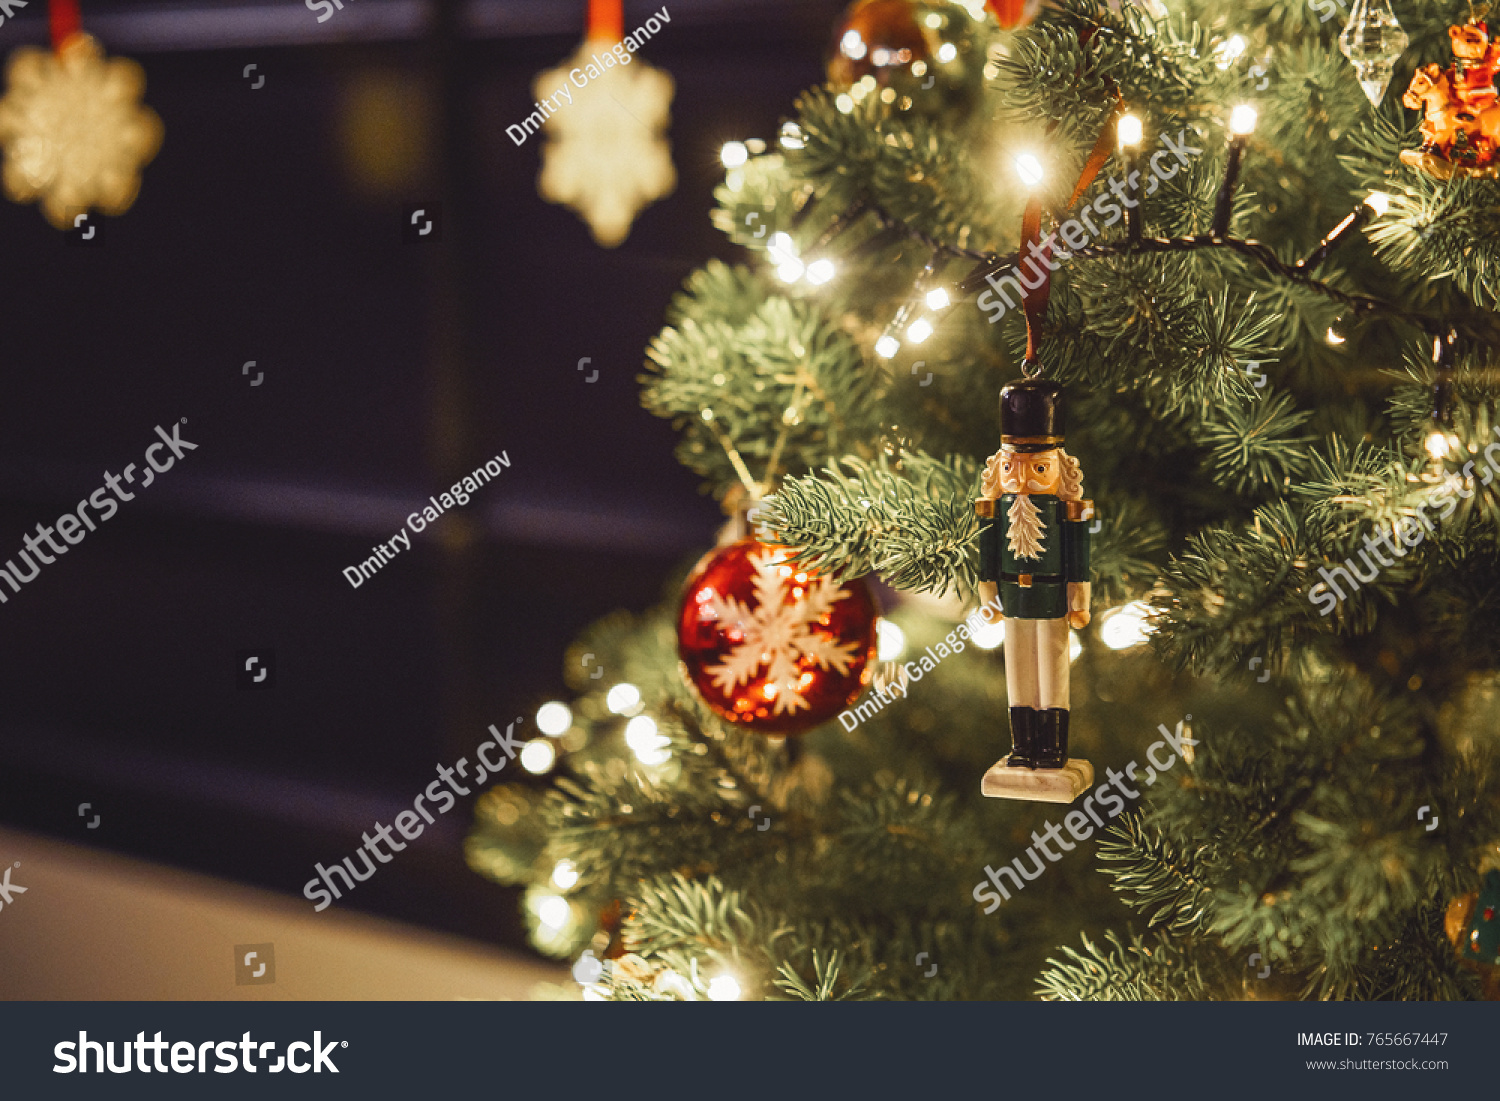 tin soldier christmas decorations